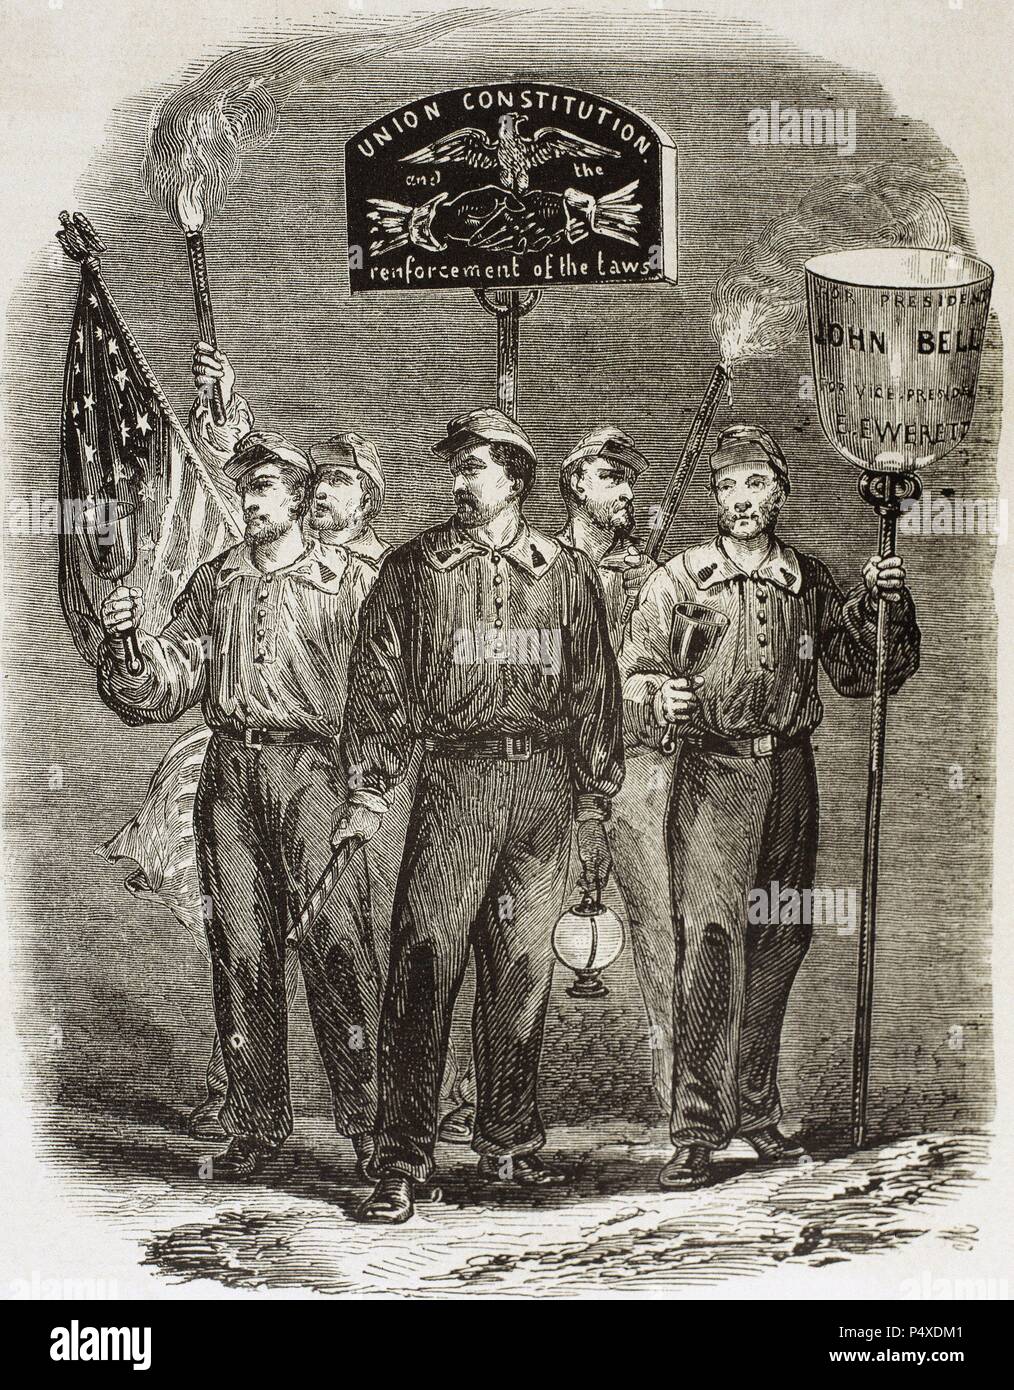 United States. Party supporters of John Bell, candidate of the Constitutional Union Party. Engraving from 'L'Illustration Journal Universel, 1860. Stock Photo